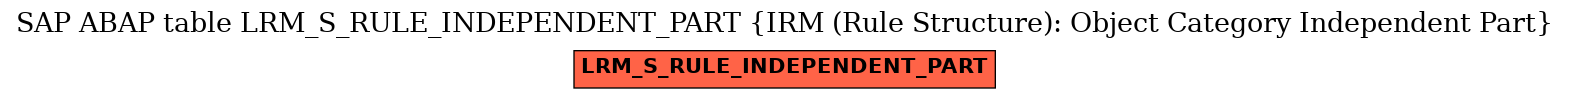 E-R Diagram for table LRM_S_RULE_INDEPENDENT_PART (IRM (Rule Structure): Object Category Independent Part)